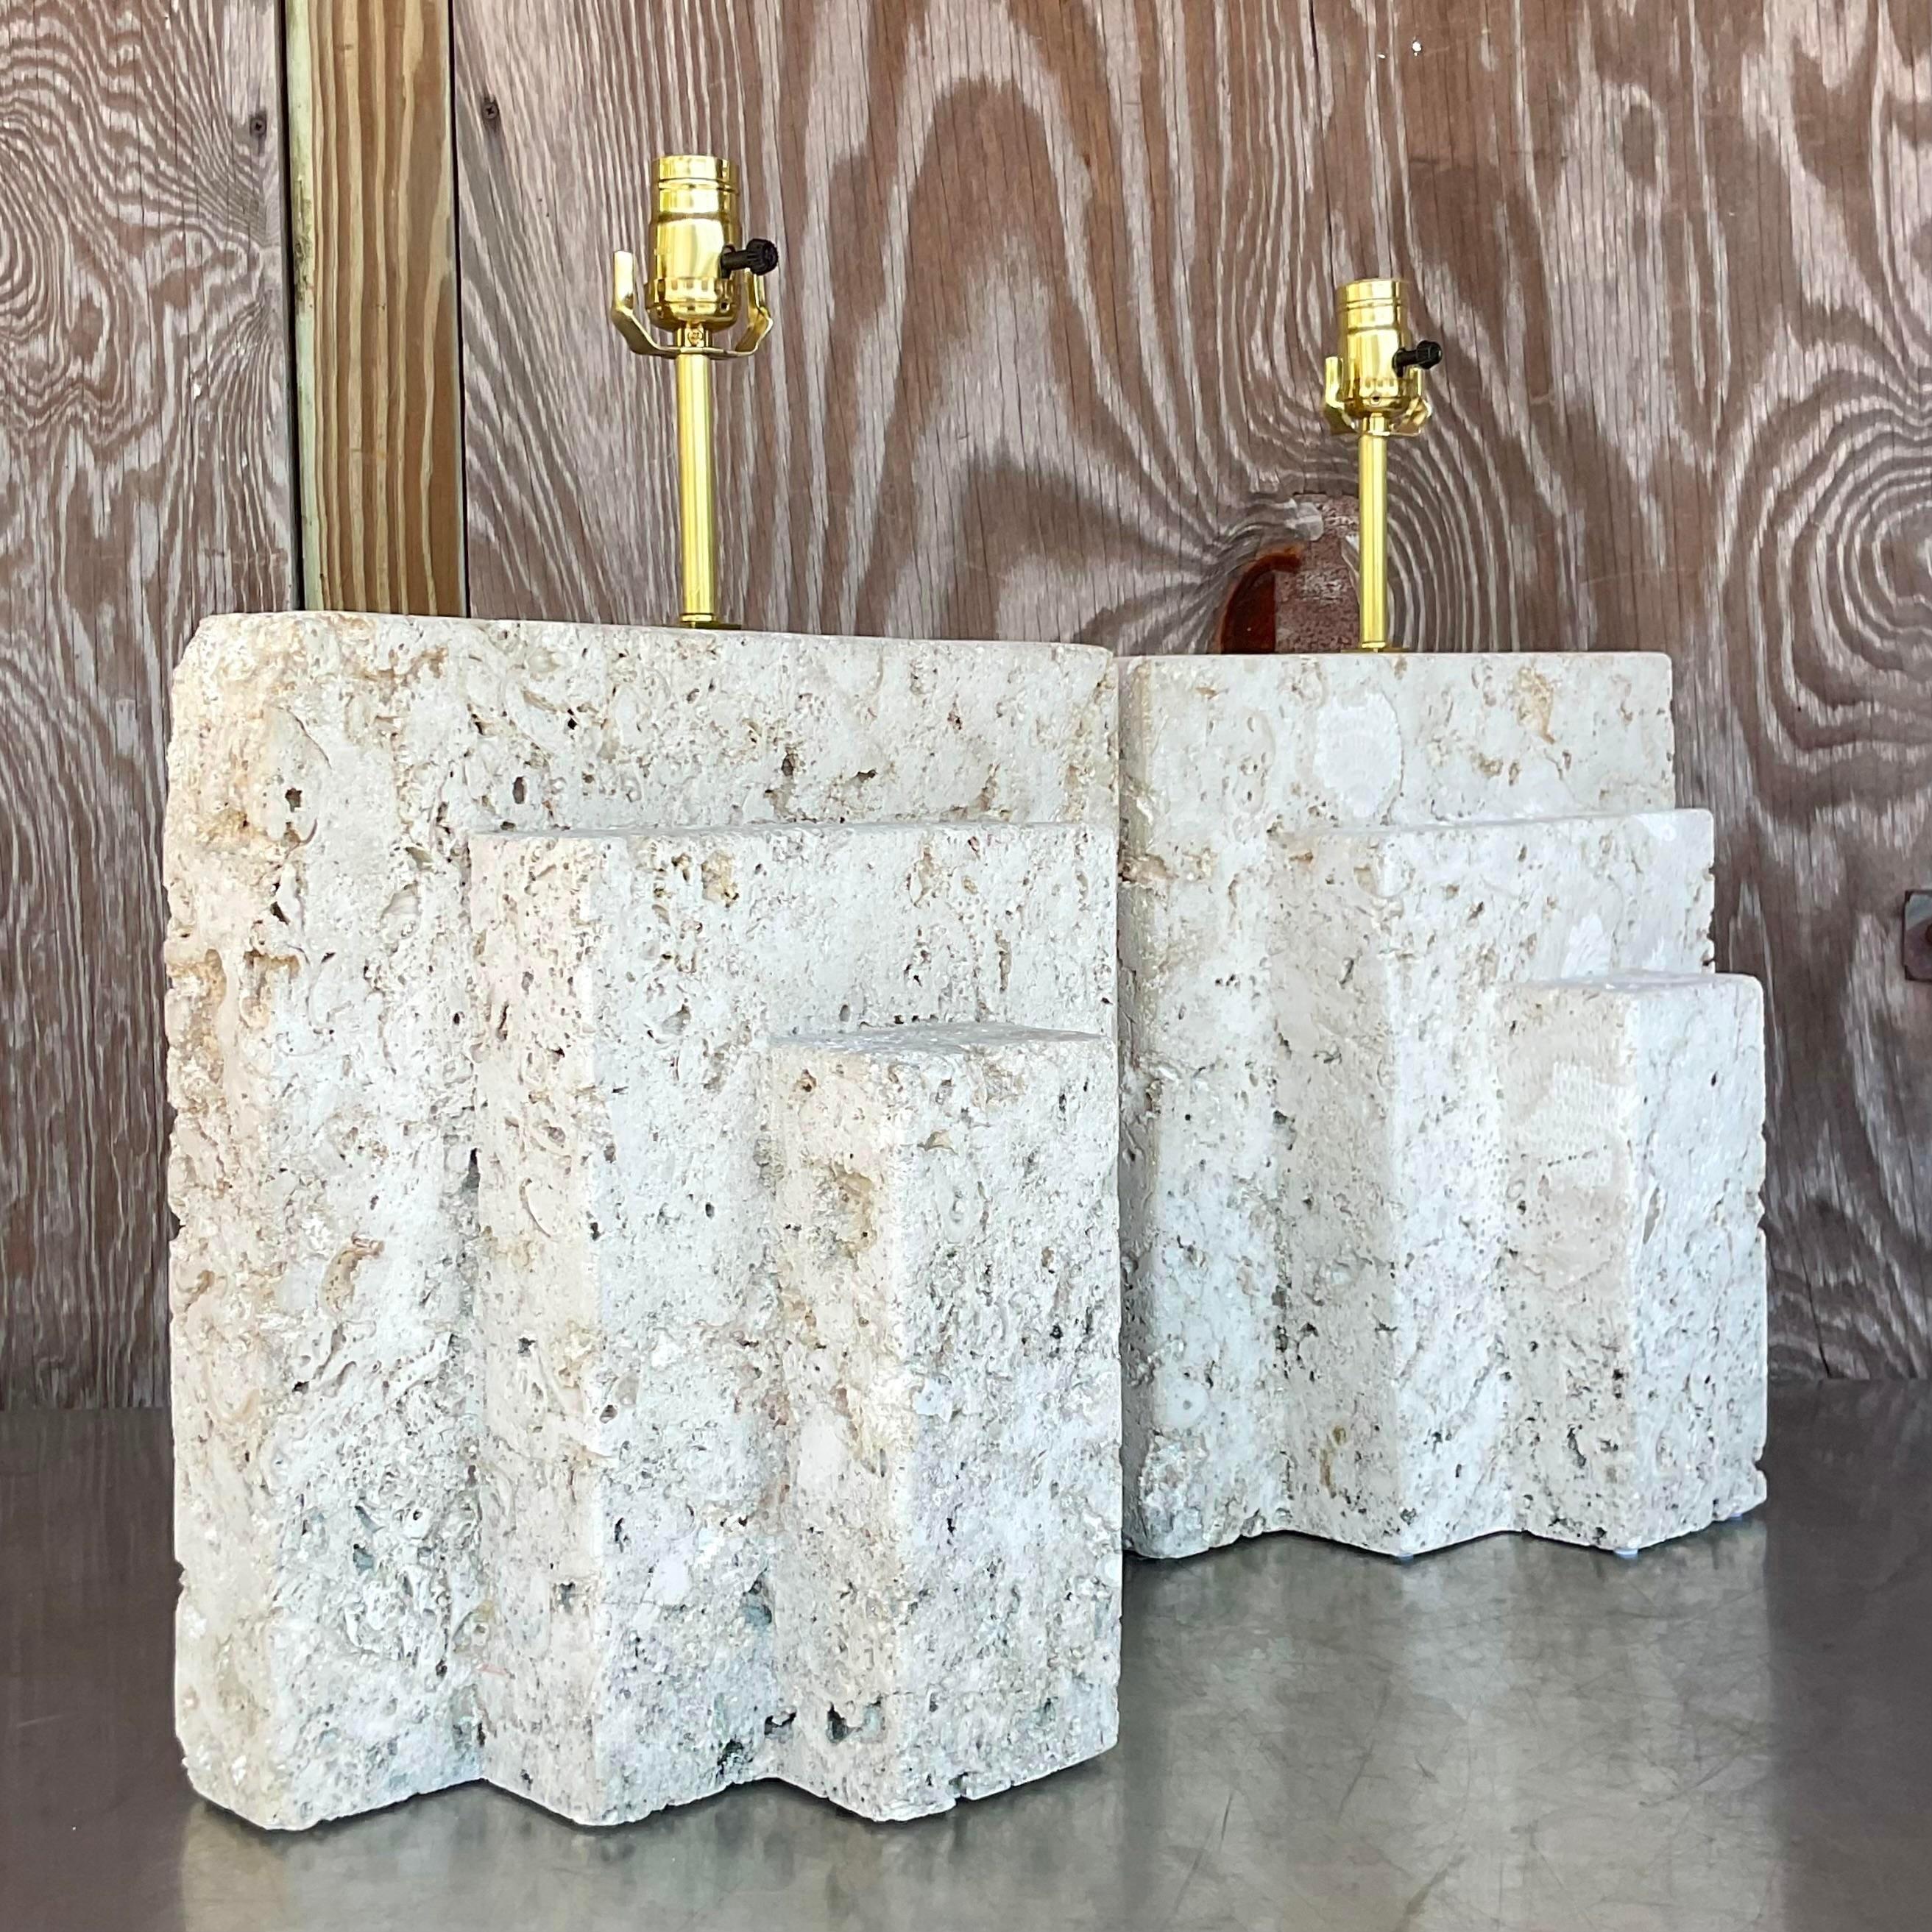 An exceptional pair of vintage Coastal Stone lamps. Gorgeous stacked Coquina stone with brass hardware. Fully restored with all new hardware and wiring. Acquired from a Palm Beach estate.